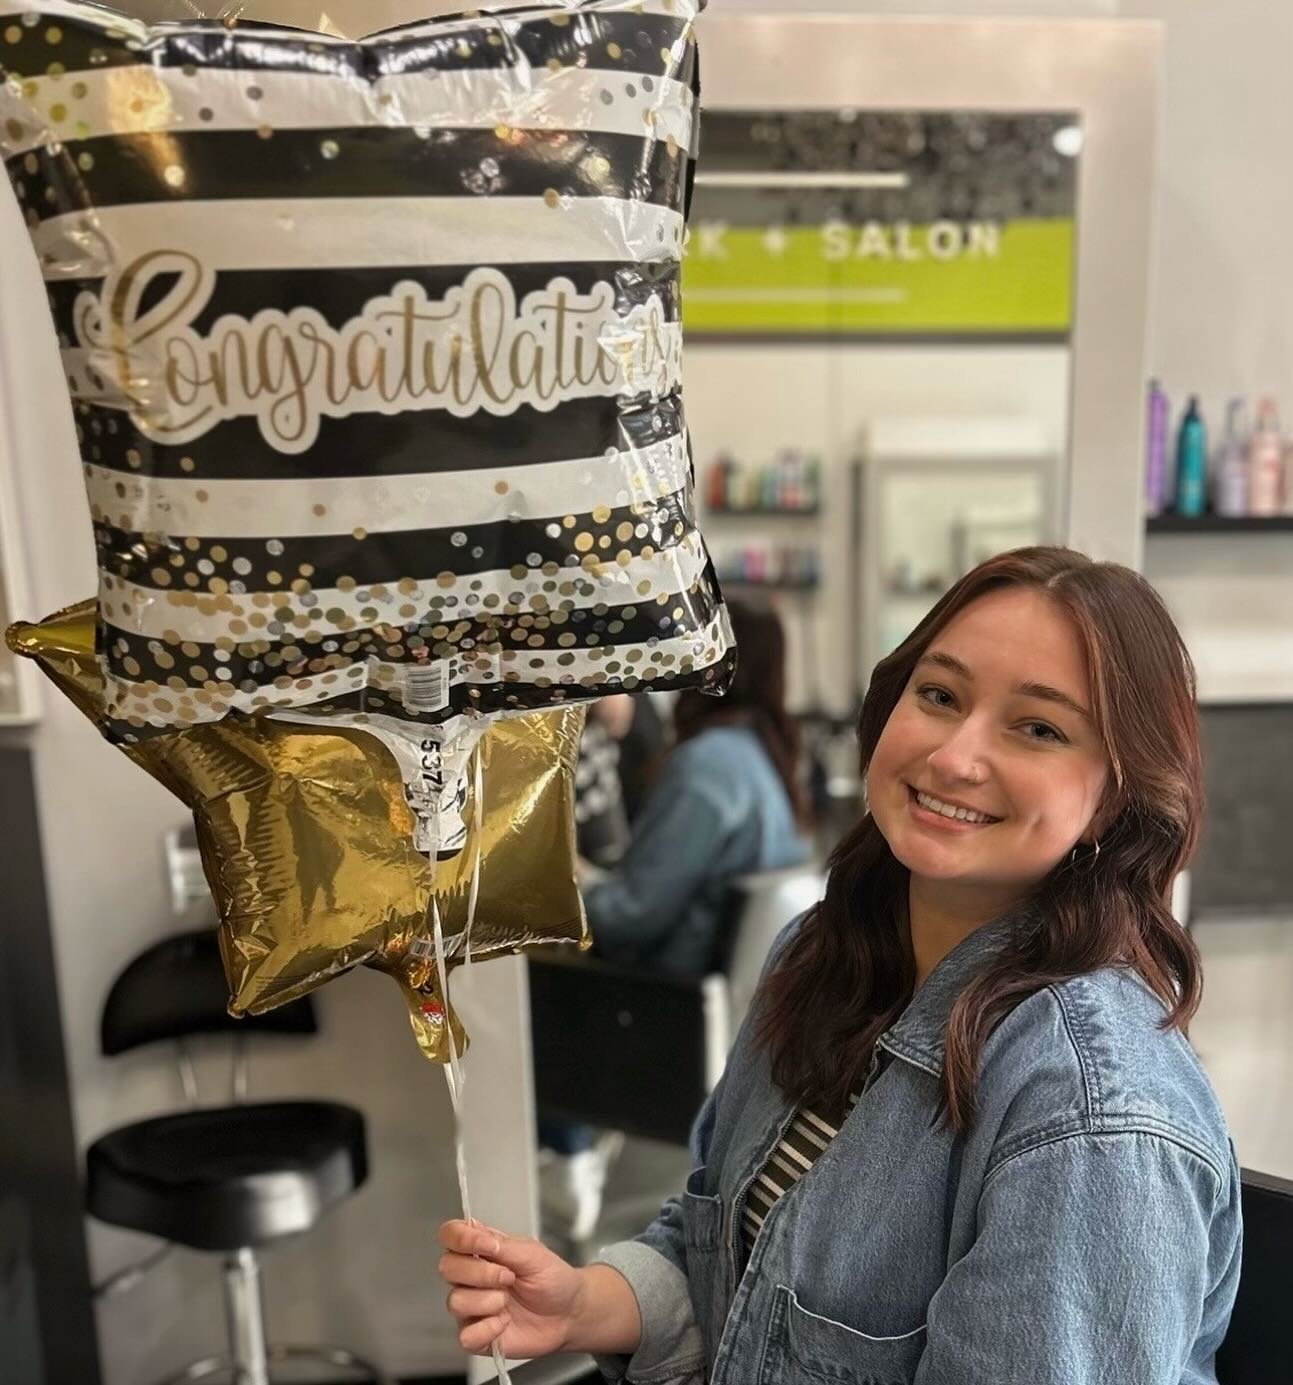 Congratulations to Alaina on completing our master&rsquo;s training program in record time and advancing to Level 1 Stylist.

Don&rsquo;t be fooled by her calm and cool demeanor- Alaina is seriously talented and passionate about giving her guests the